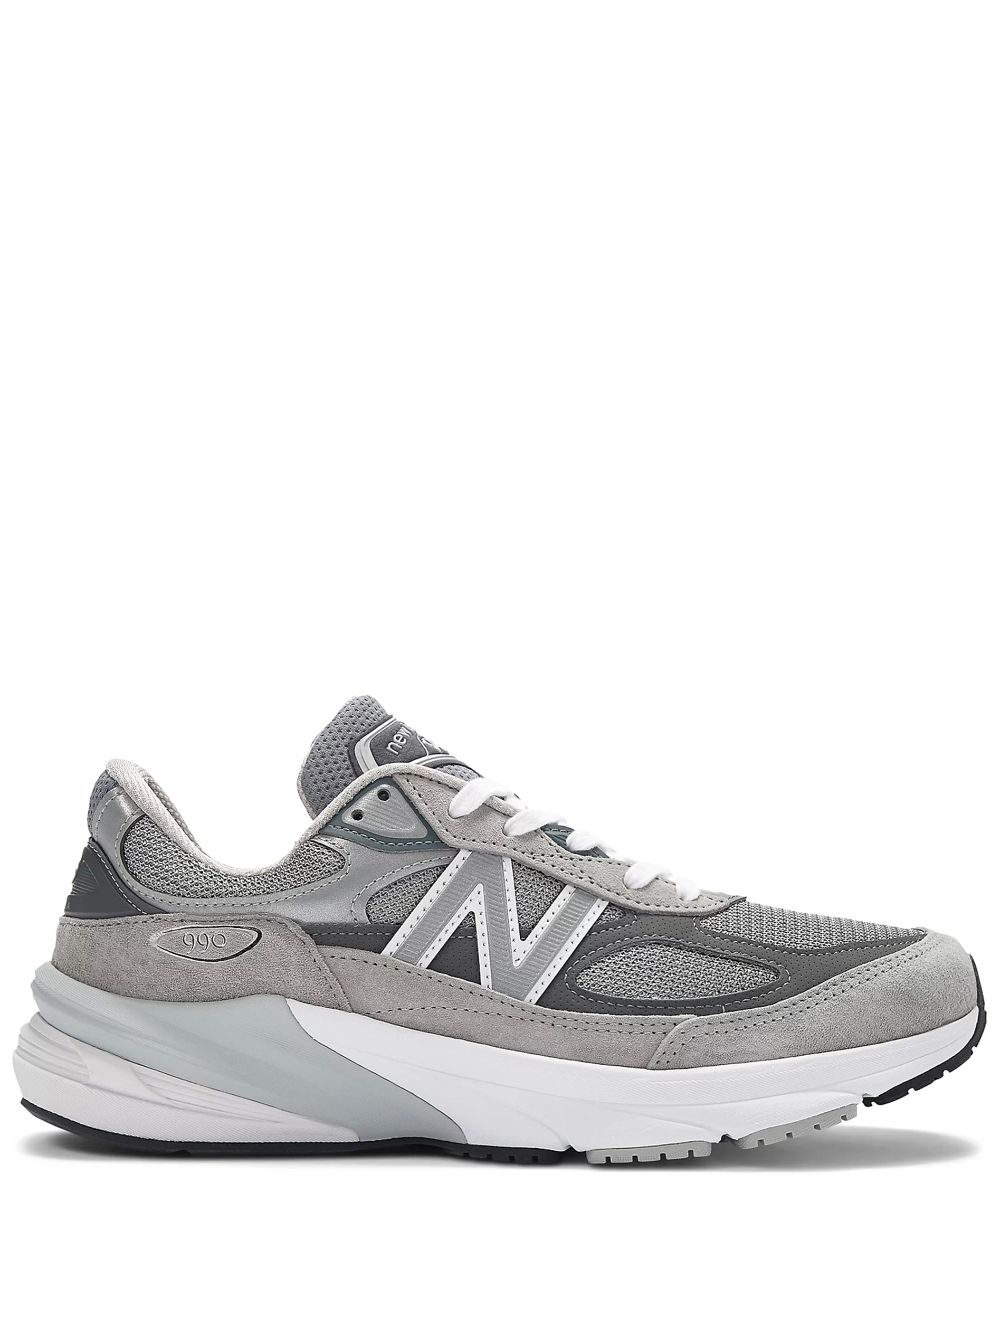 New Balance 990 V6 low-top sneakers - Grey